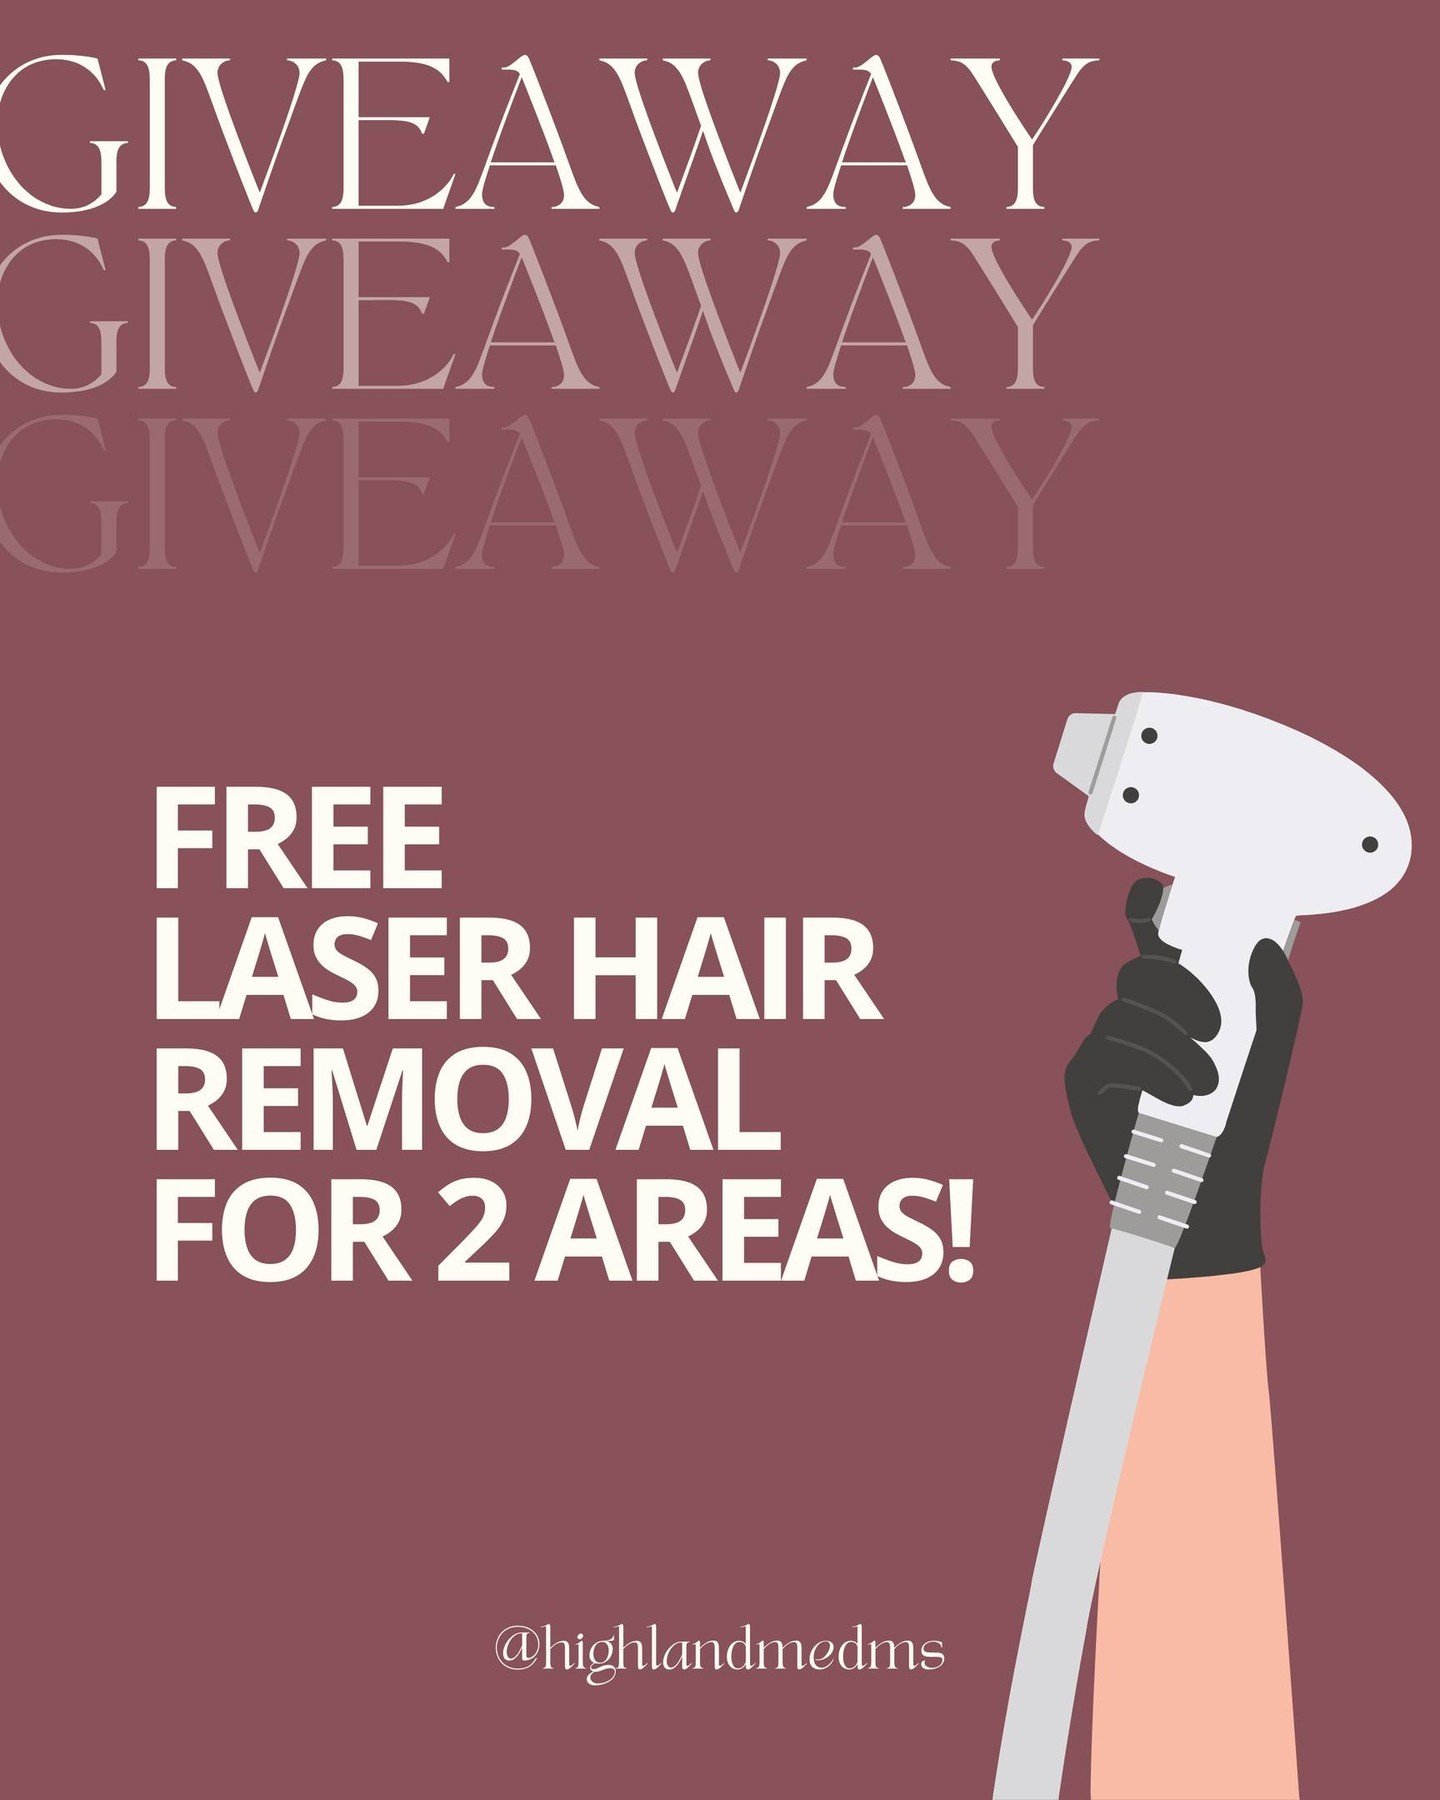 ✨️GIVEAWAY✨️ Summer is {finally} almost here and we&rsquo;re giving away FREE laser hair removal sessions!⁠
⁠
The winner will receive up to 5 FREE sessions for brazilian and underarms! Here&rsquo;s how to enter:⁠
⁠
✨️ Follow @highlandmedms, @saracour